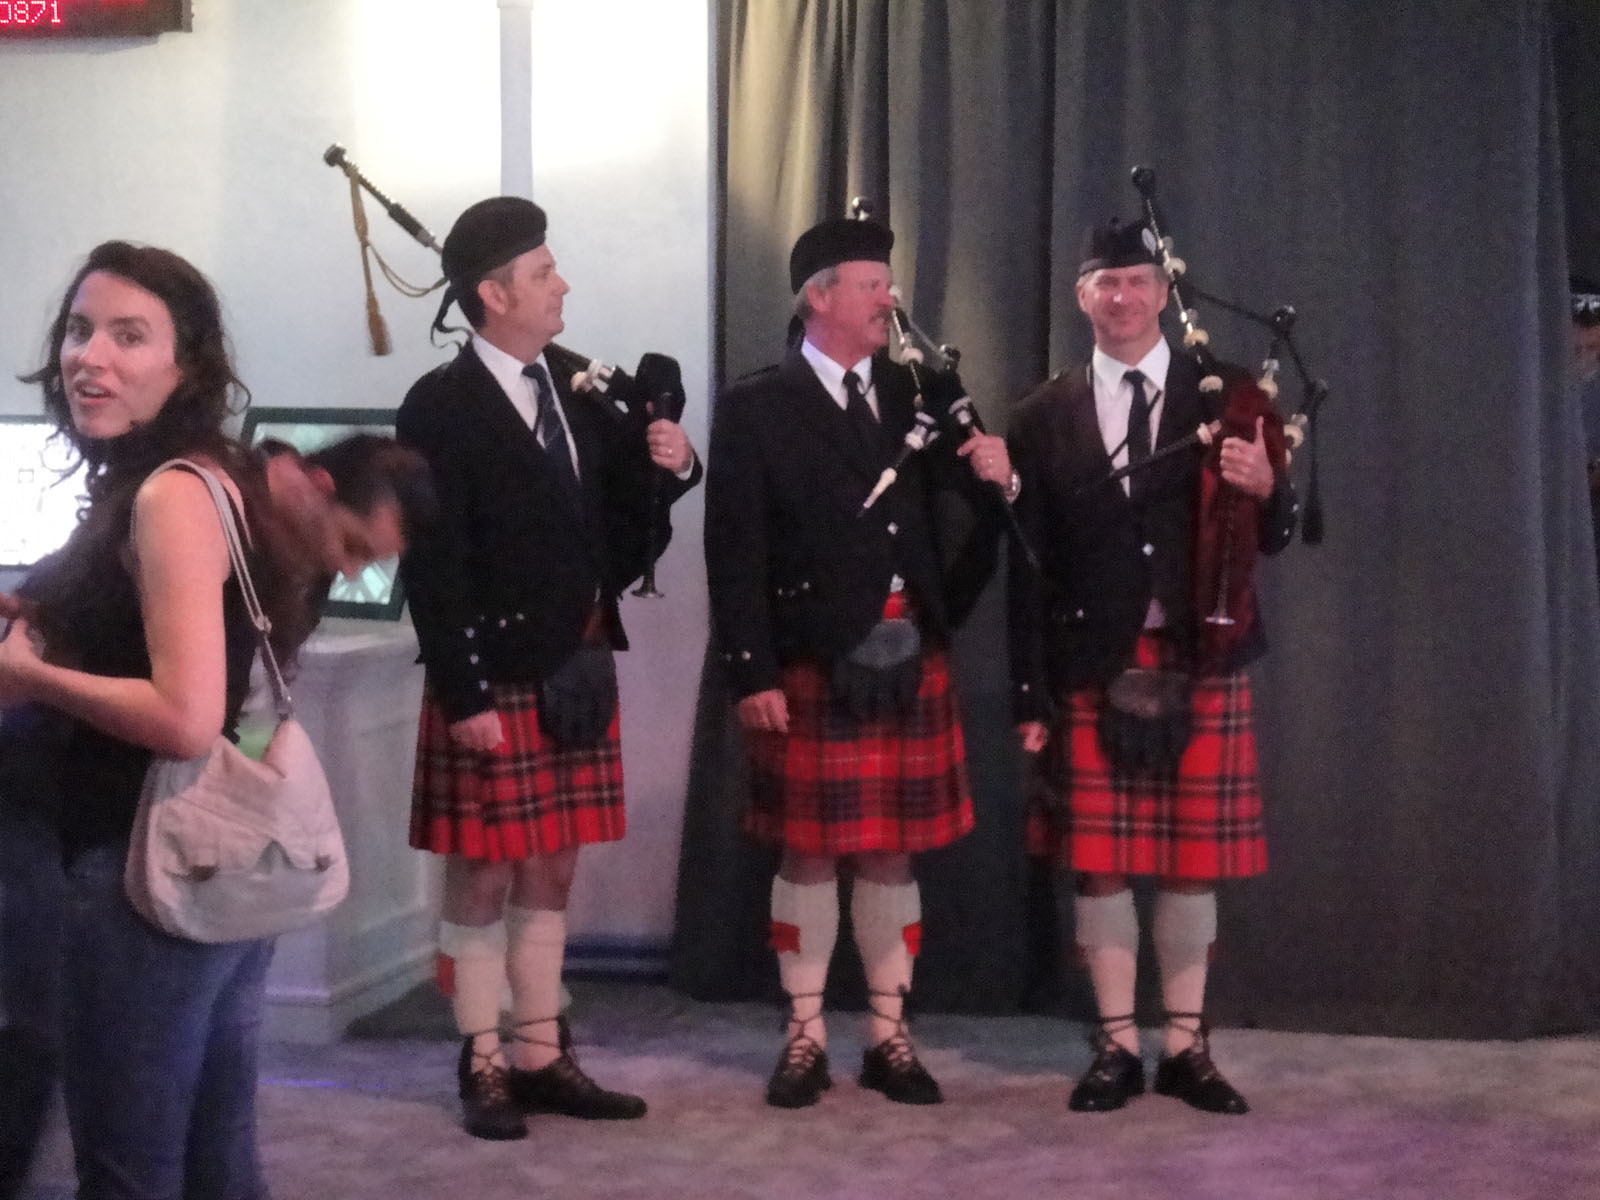 three women are dressed in a uniform with pipes, and three men are wearing kilts